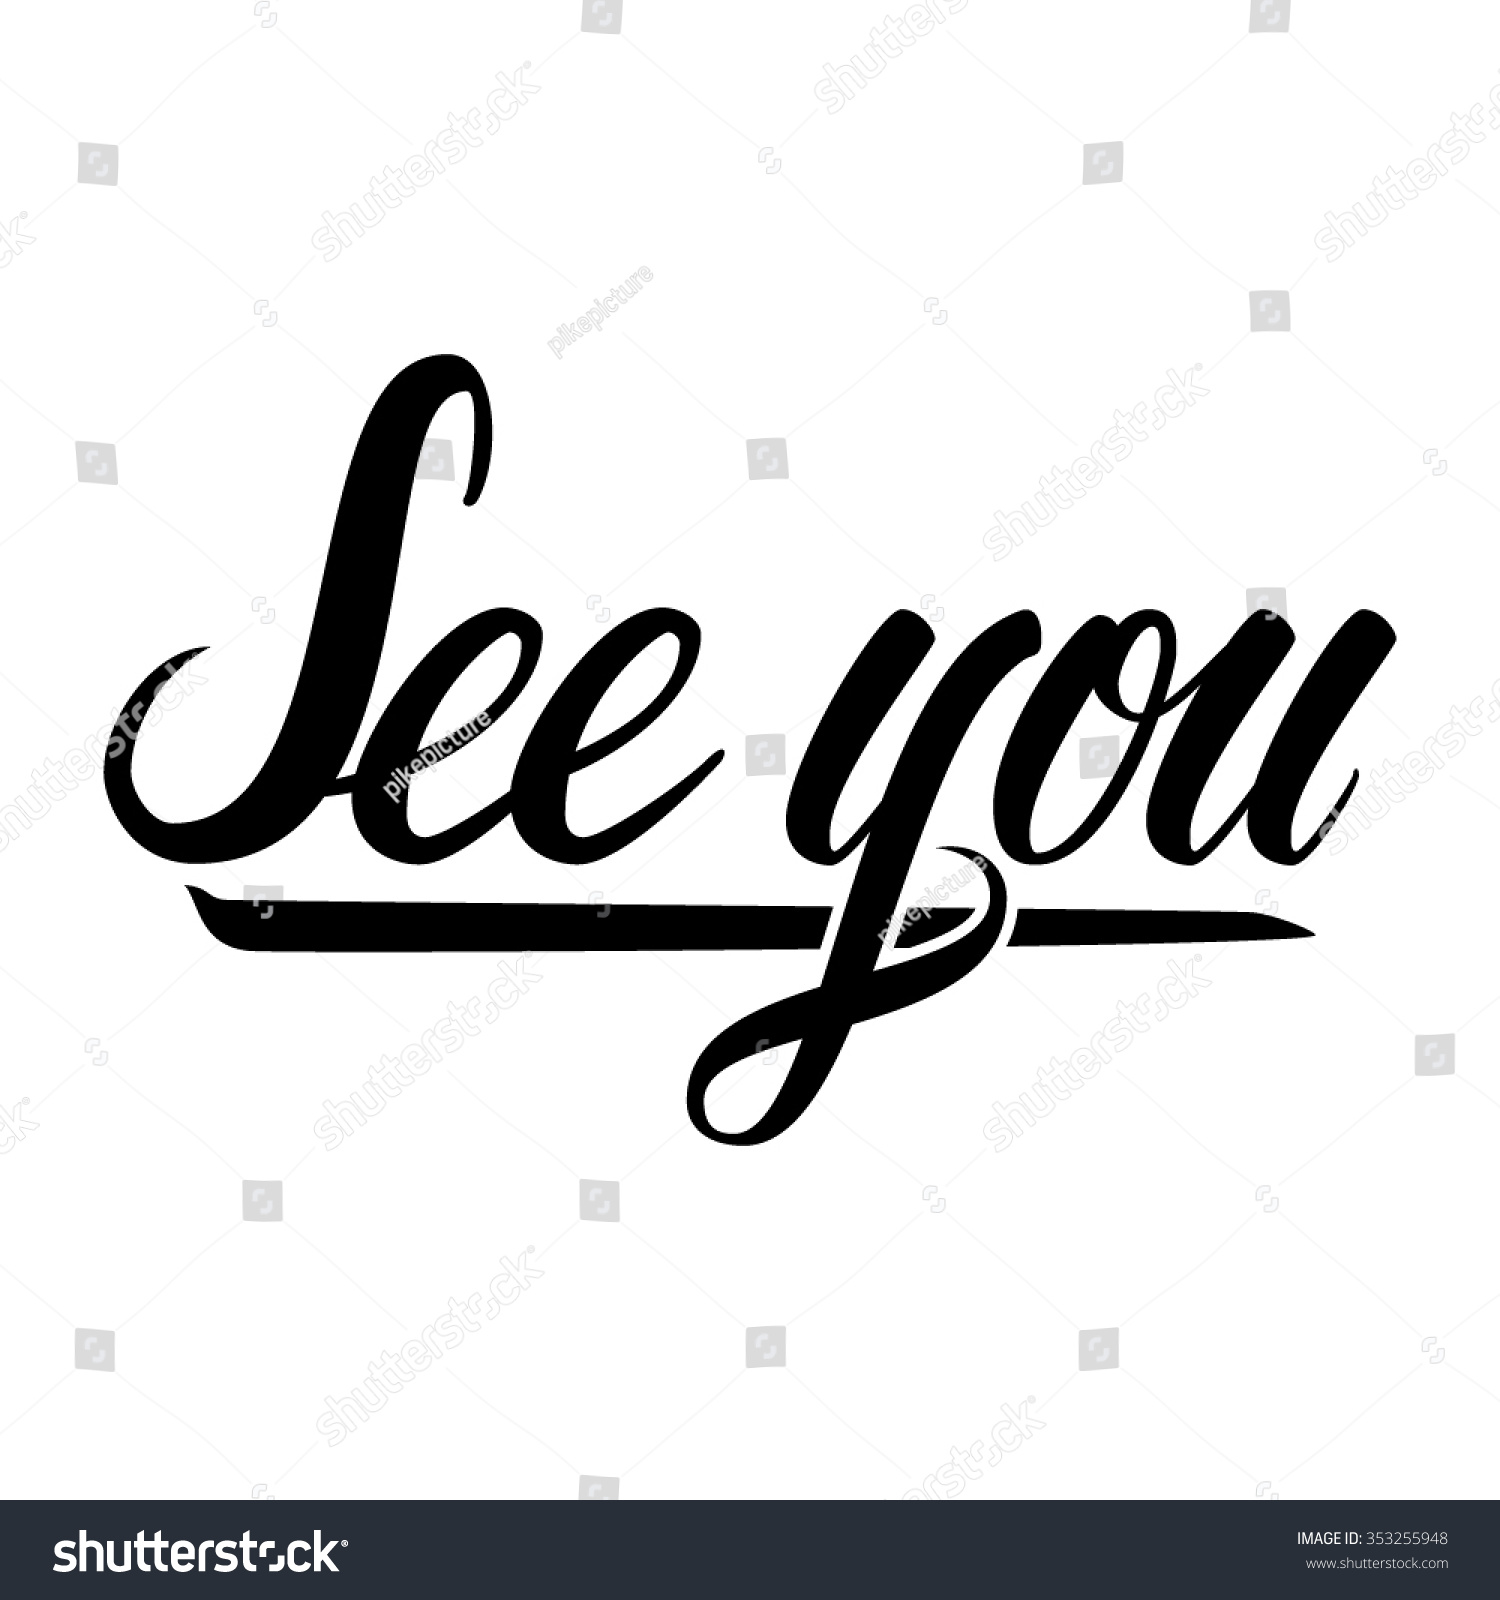 SVG of See you. Hand lettering text isolated in white background. Vector illustration
 svg